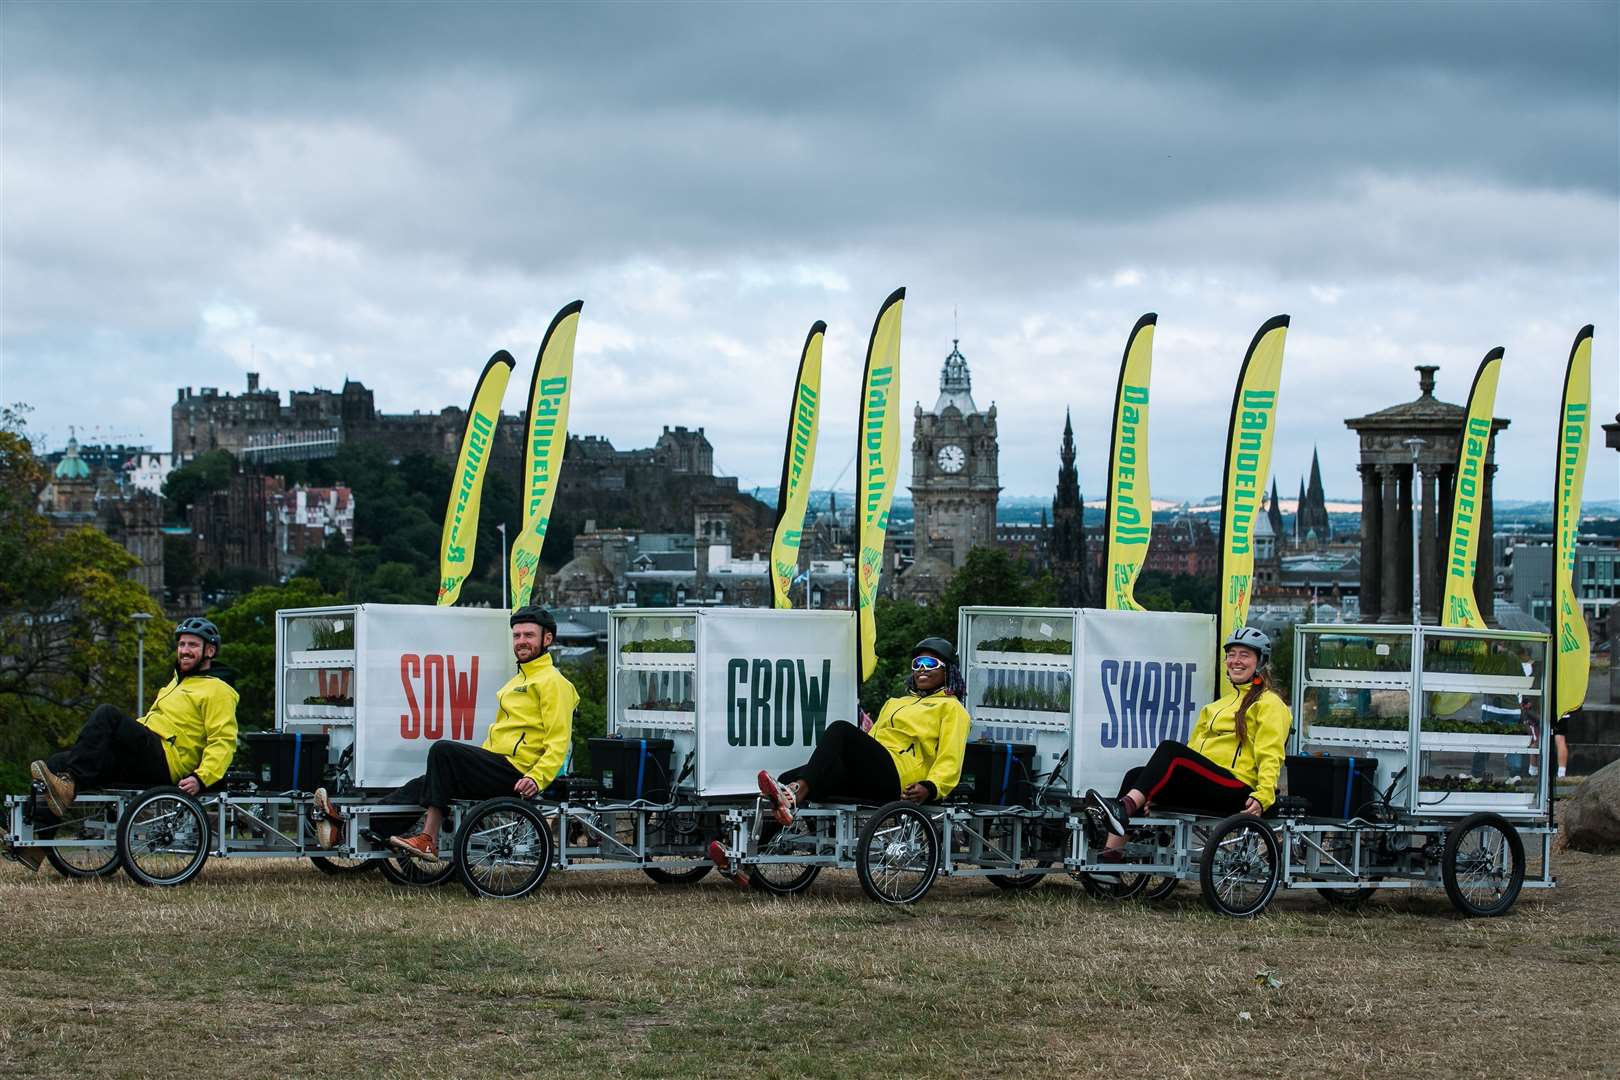 The cargo bikes carrying the growing Cubes of Perpetual Light will visit towns and cities across Scotland. Picture: Andrew Cawley.